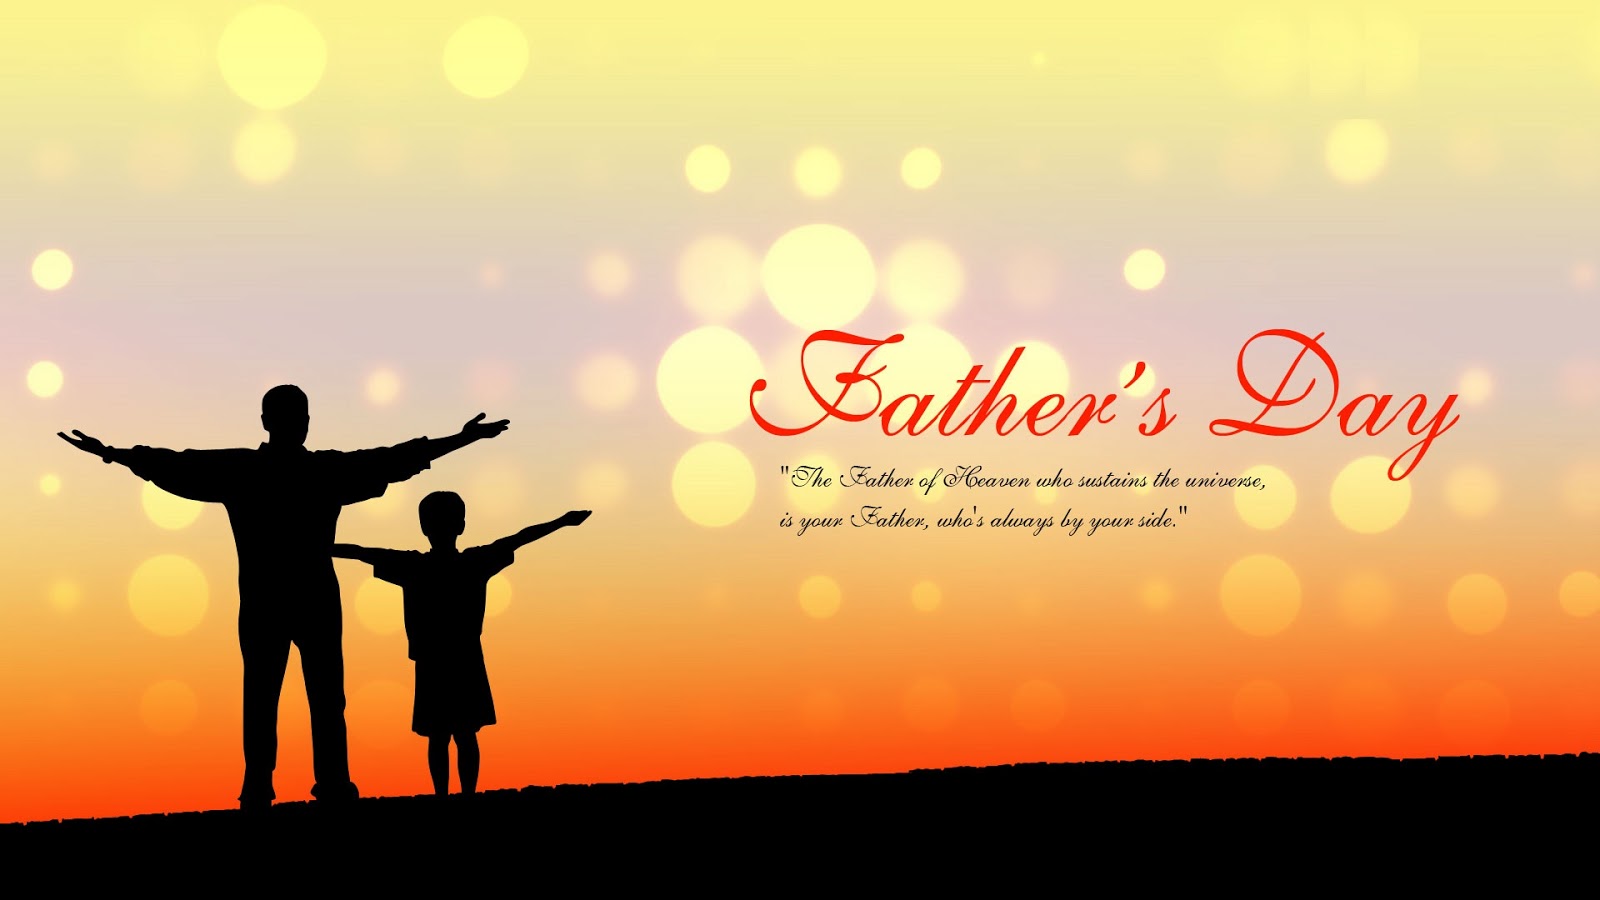 Beautiful Father s Day Pics Simple Father s Day Images Festival Chaska